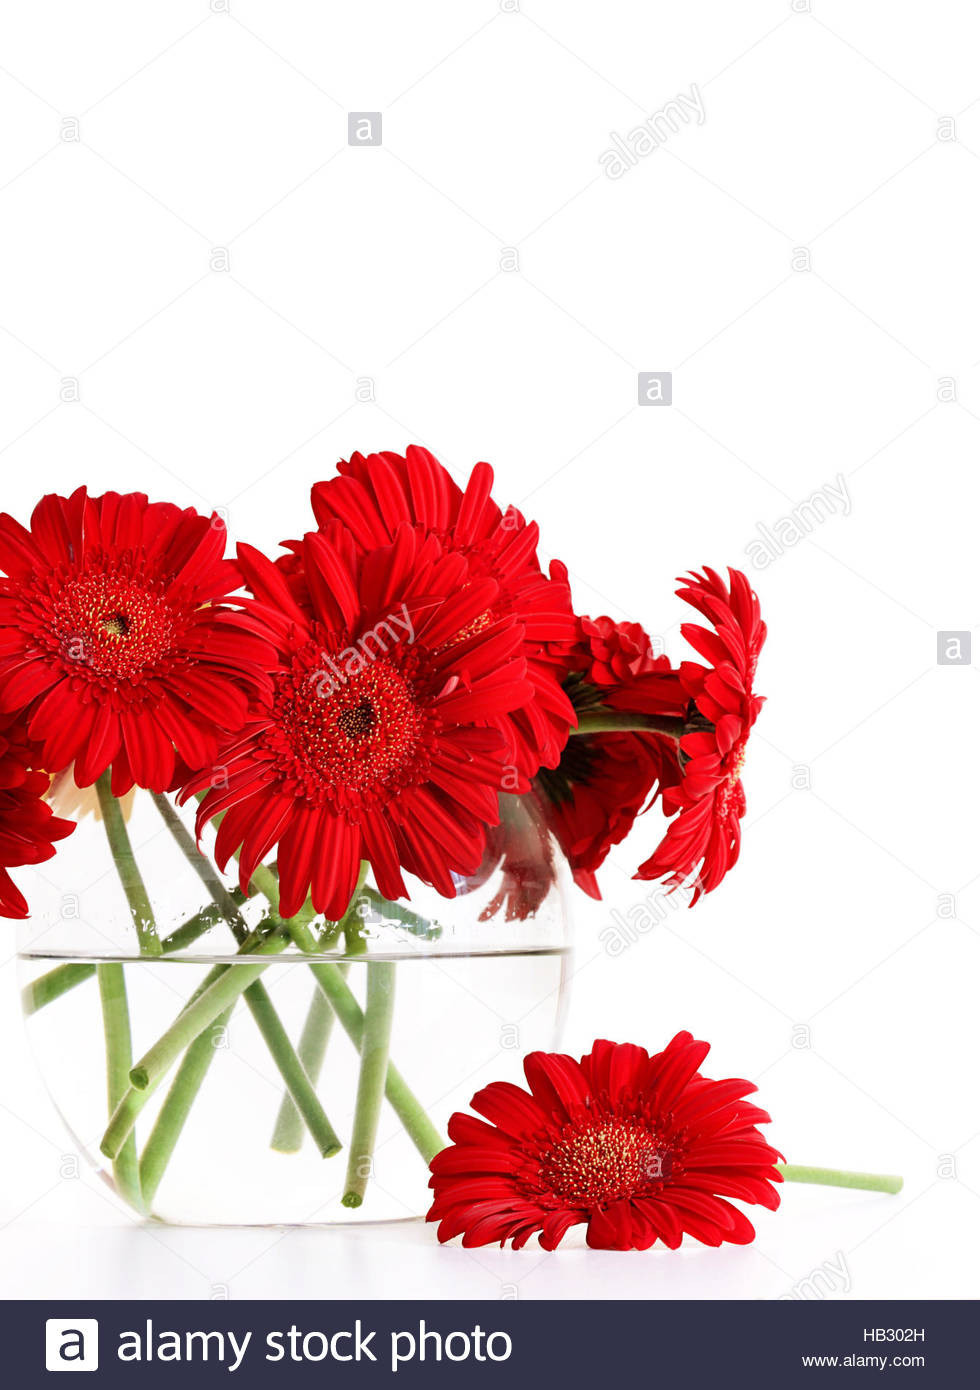 26 Recommended Jeep Flower Vase 2024 free download jeep flower vase of red glass vase pictures red artificial flowers imposing vases in red glass vase pics closeup od red gerber daisies in glass vase stock of red glass